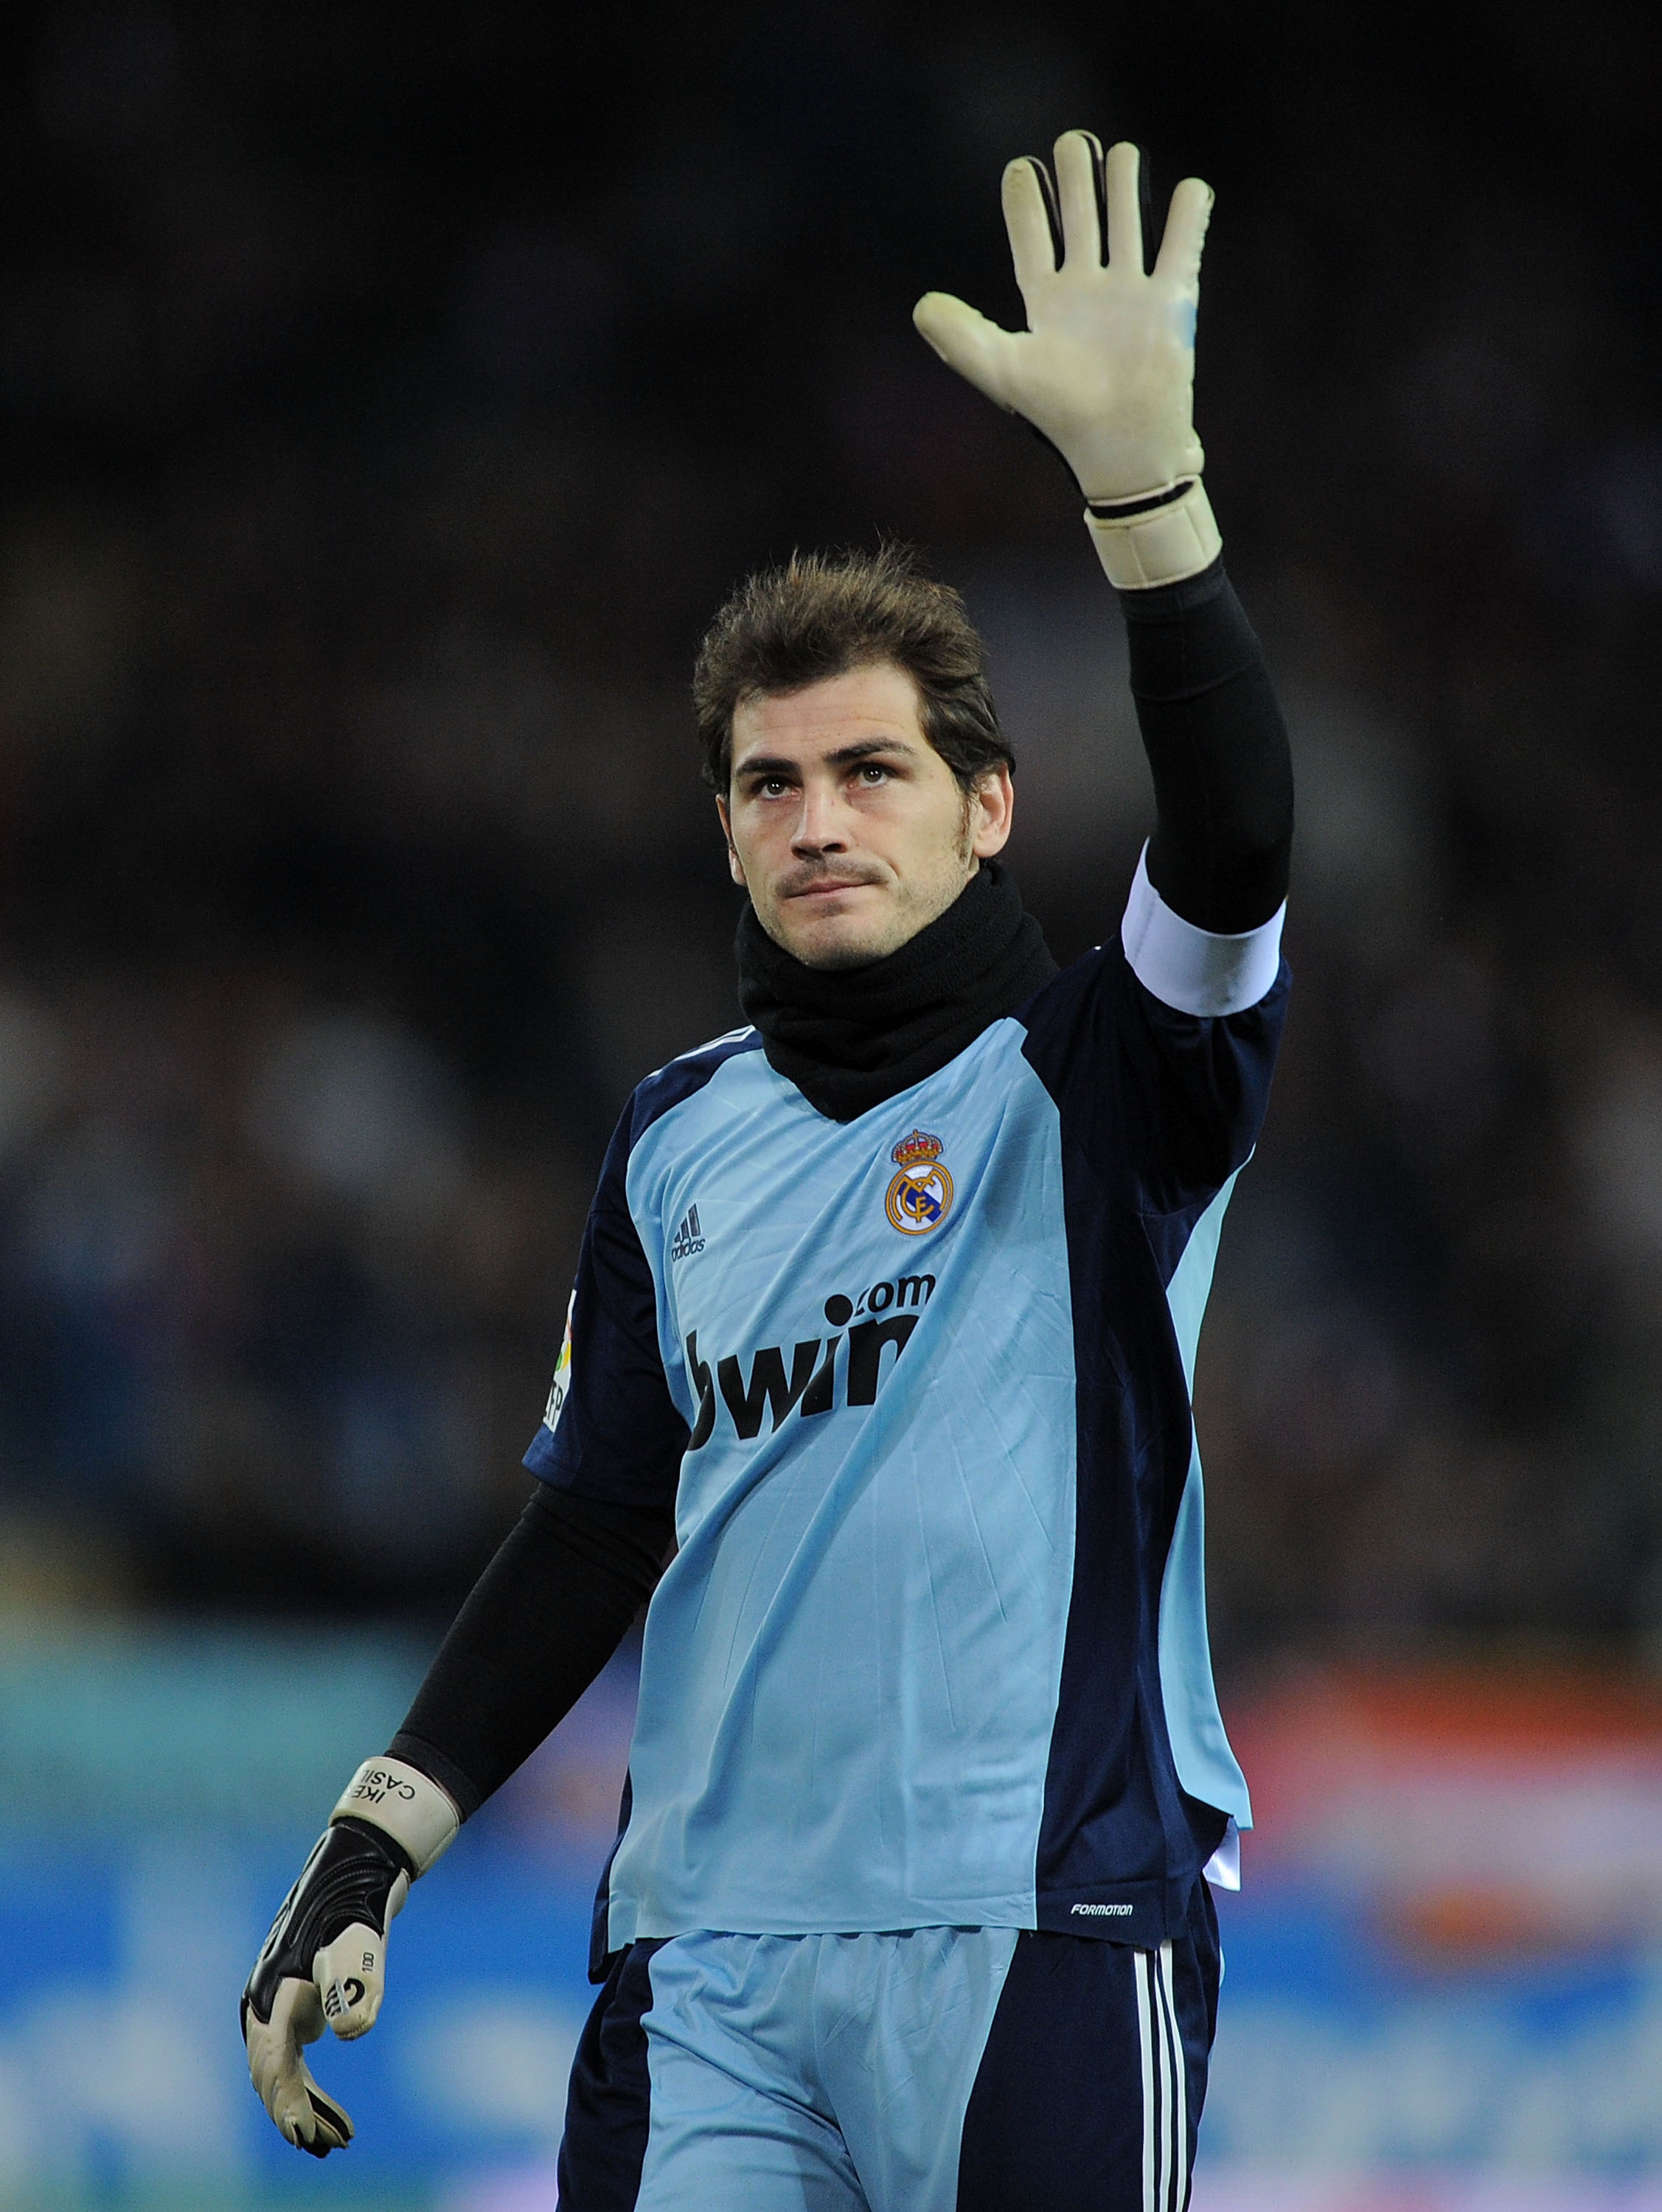 MADRID, SPAIN - JANUARY 20:  Iker Casillas of Real Madrid waves to Real fans during the Copa del Rey quarter final second leg match between Atletico Madrid and Real Madrid at Vicente Calderon Stadium on January 20, 2011 in Madrid, Spain.  (Photo by Denis